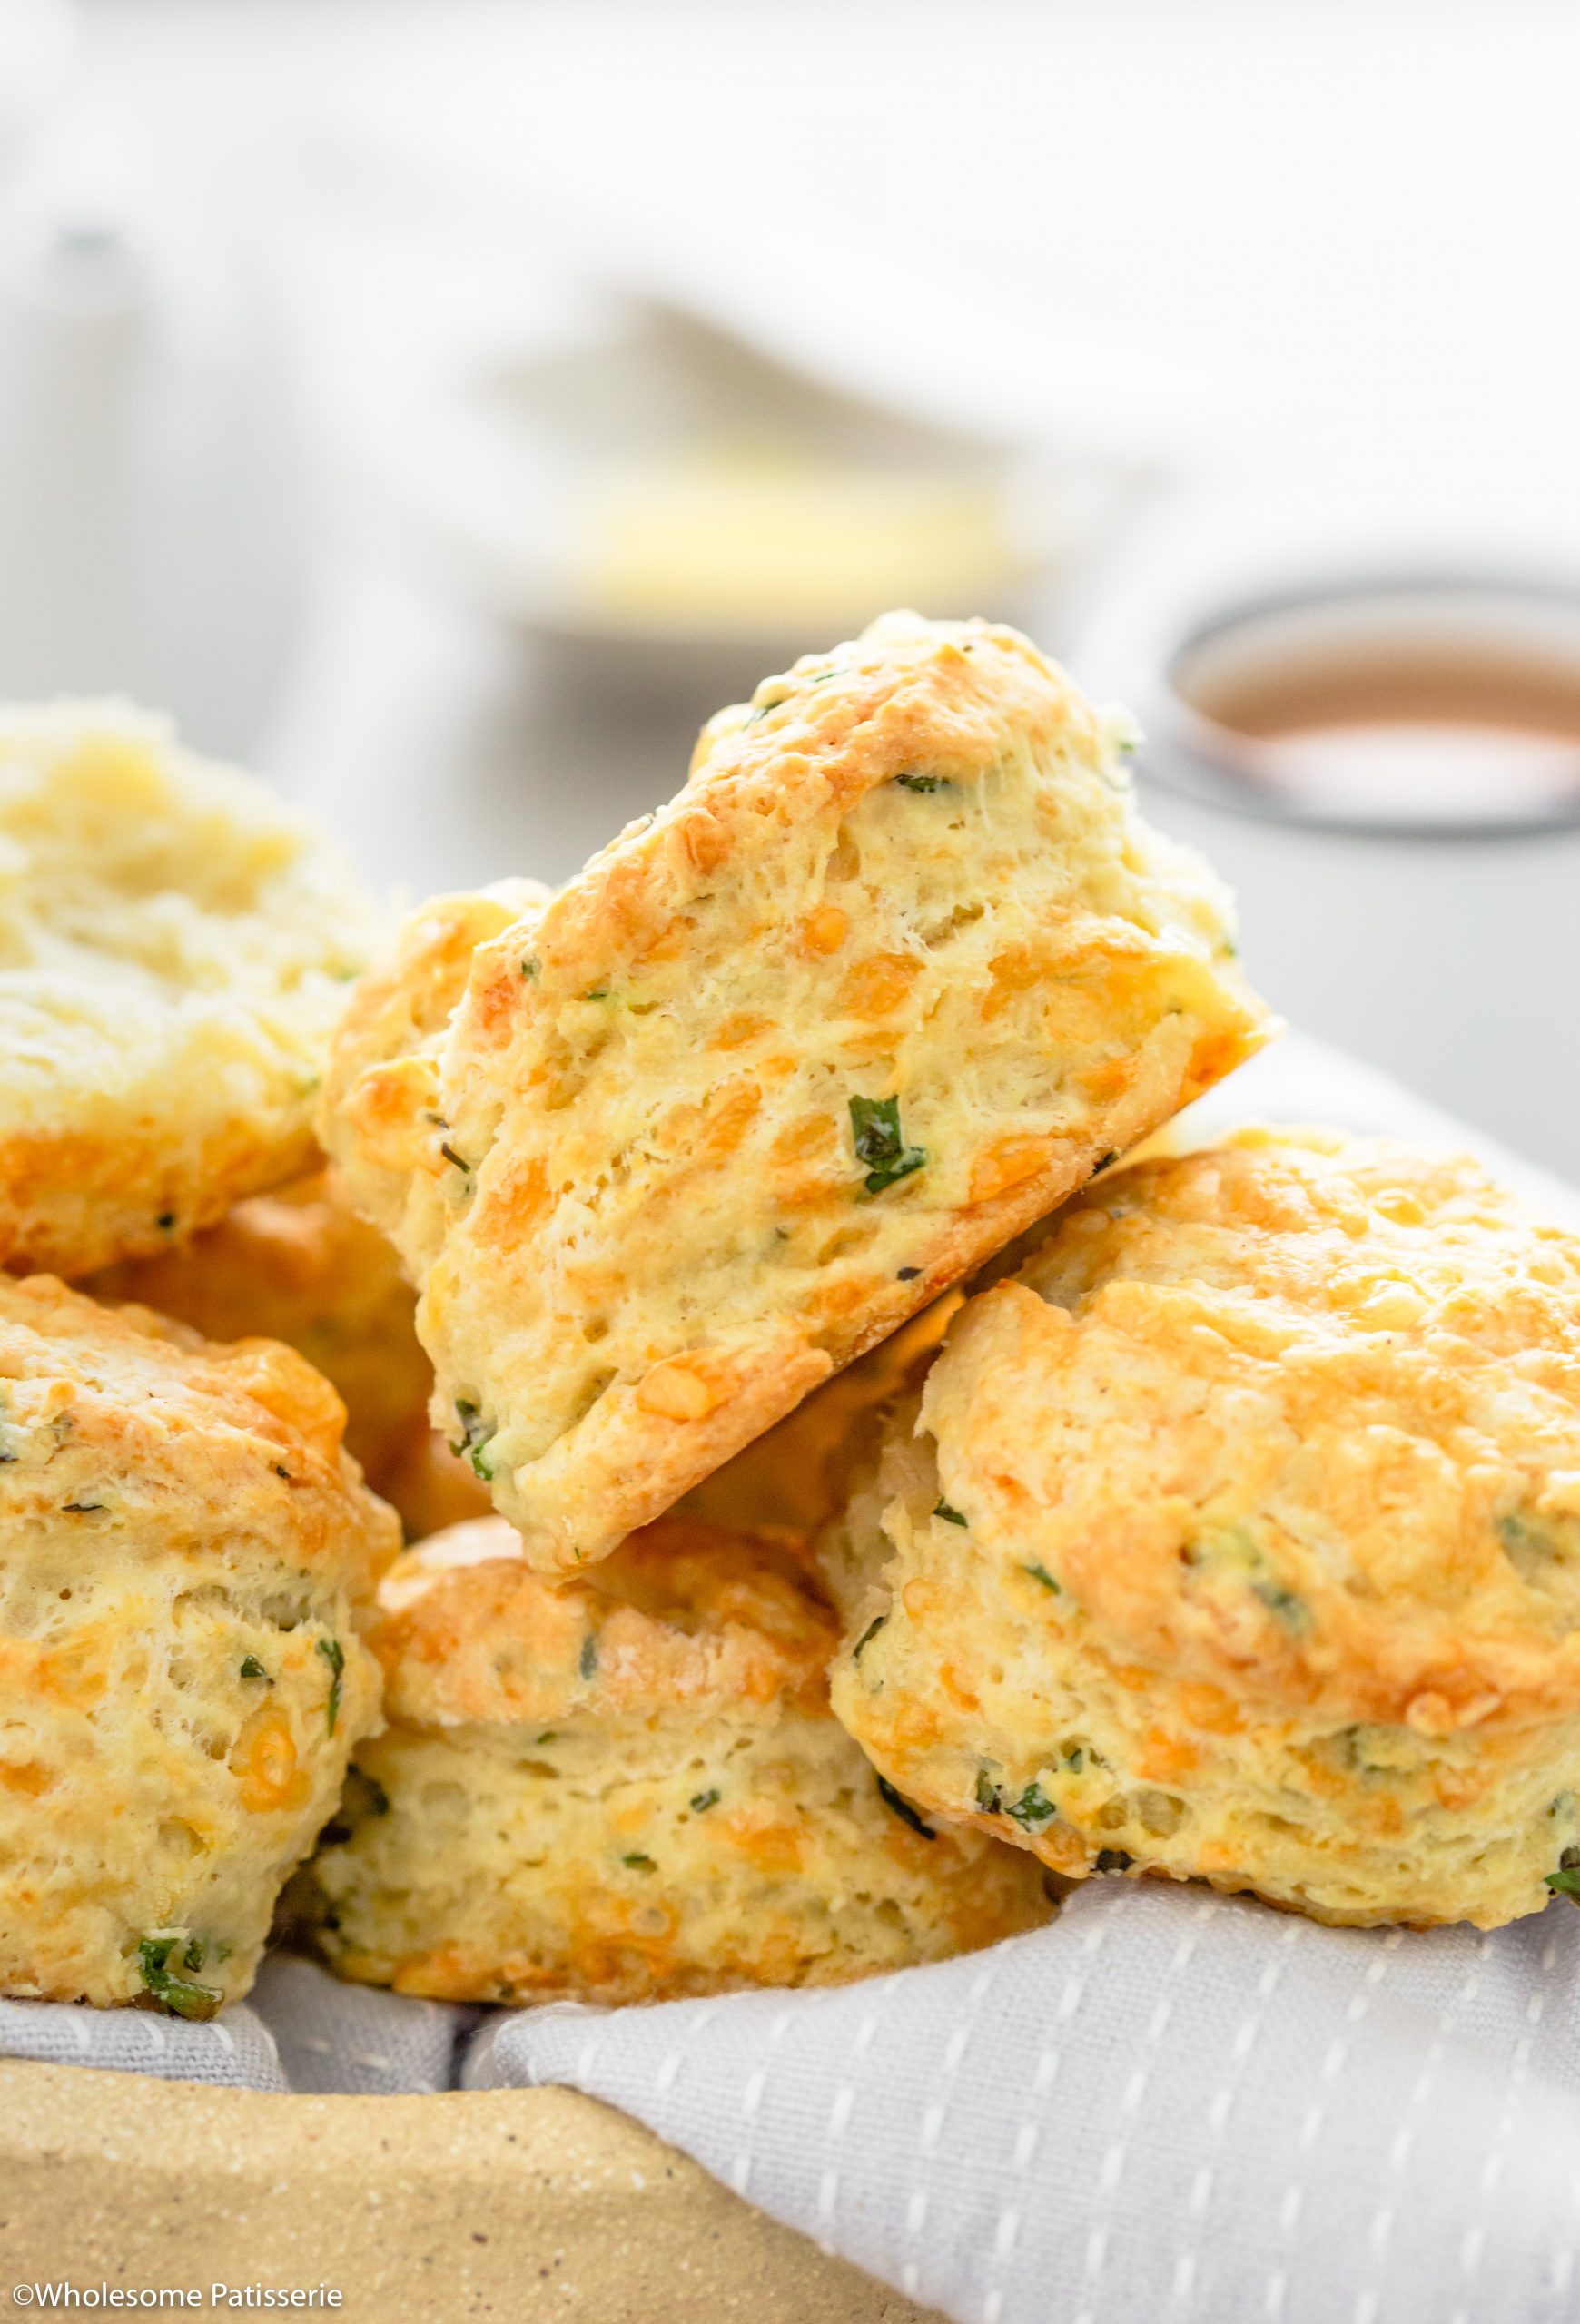 Baked cheese and chive scones close up image